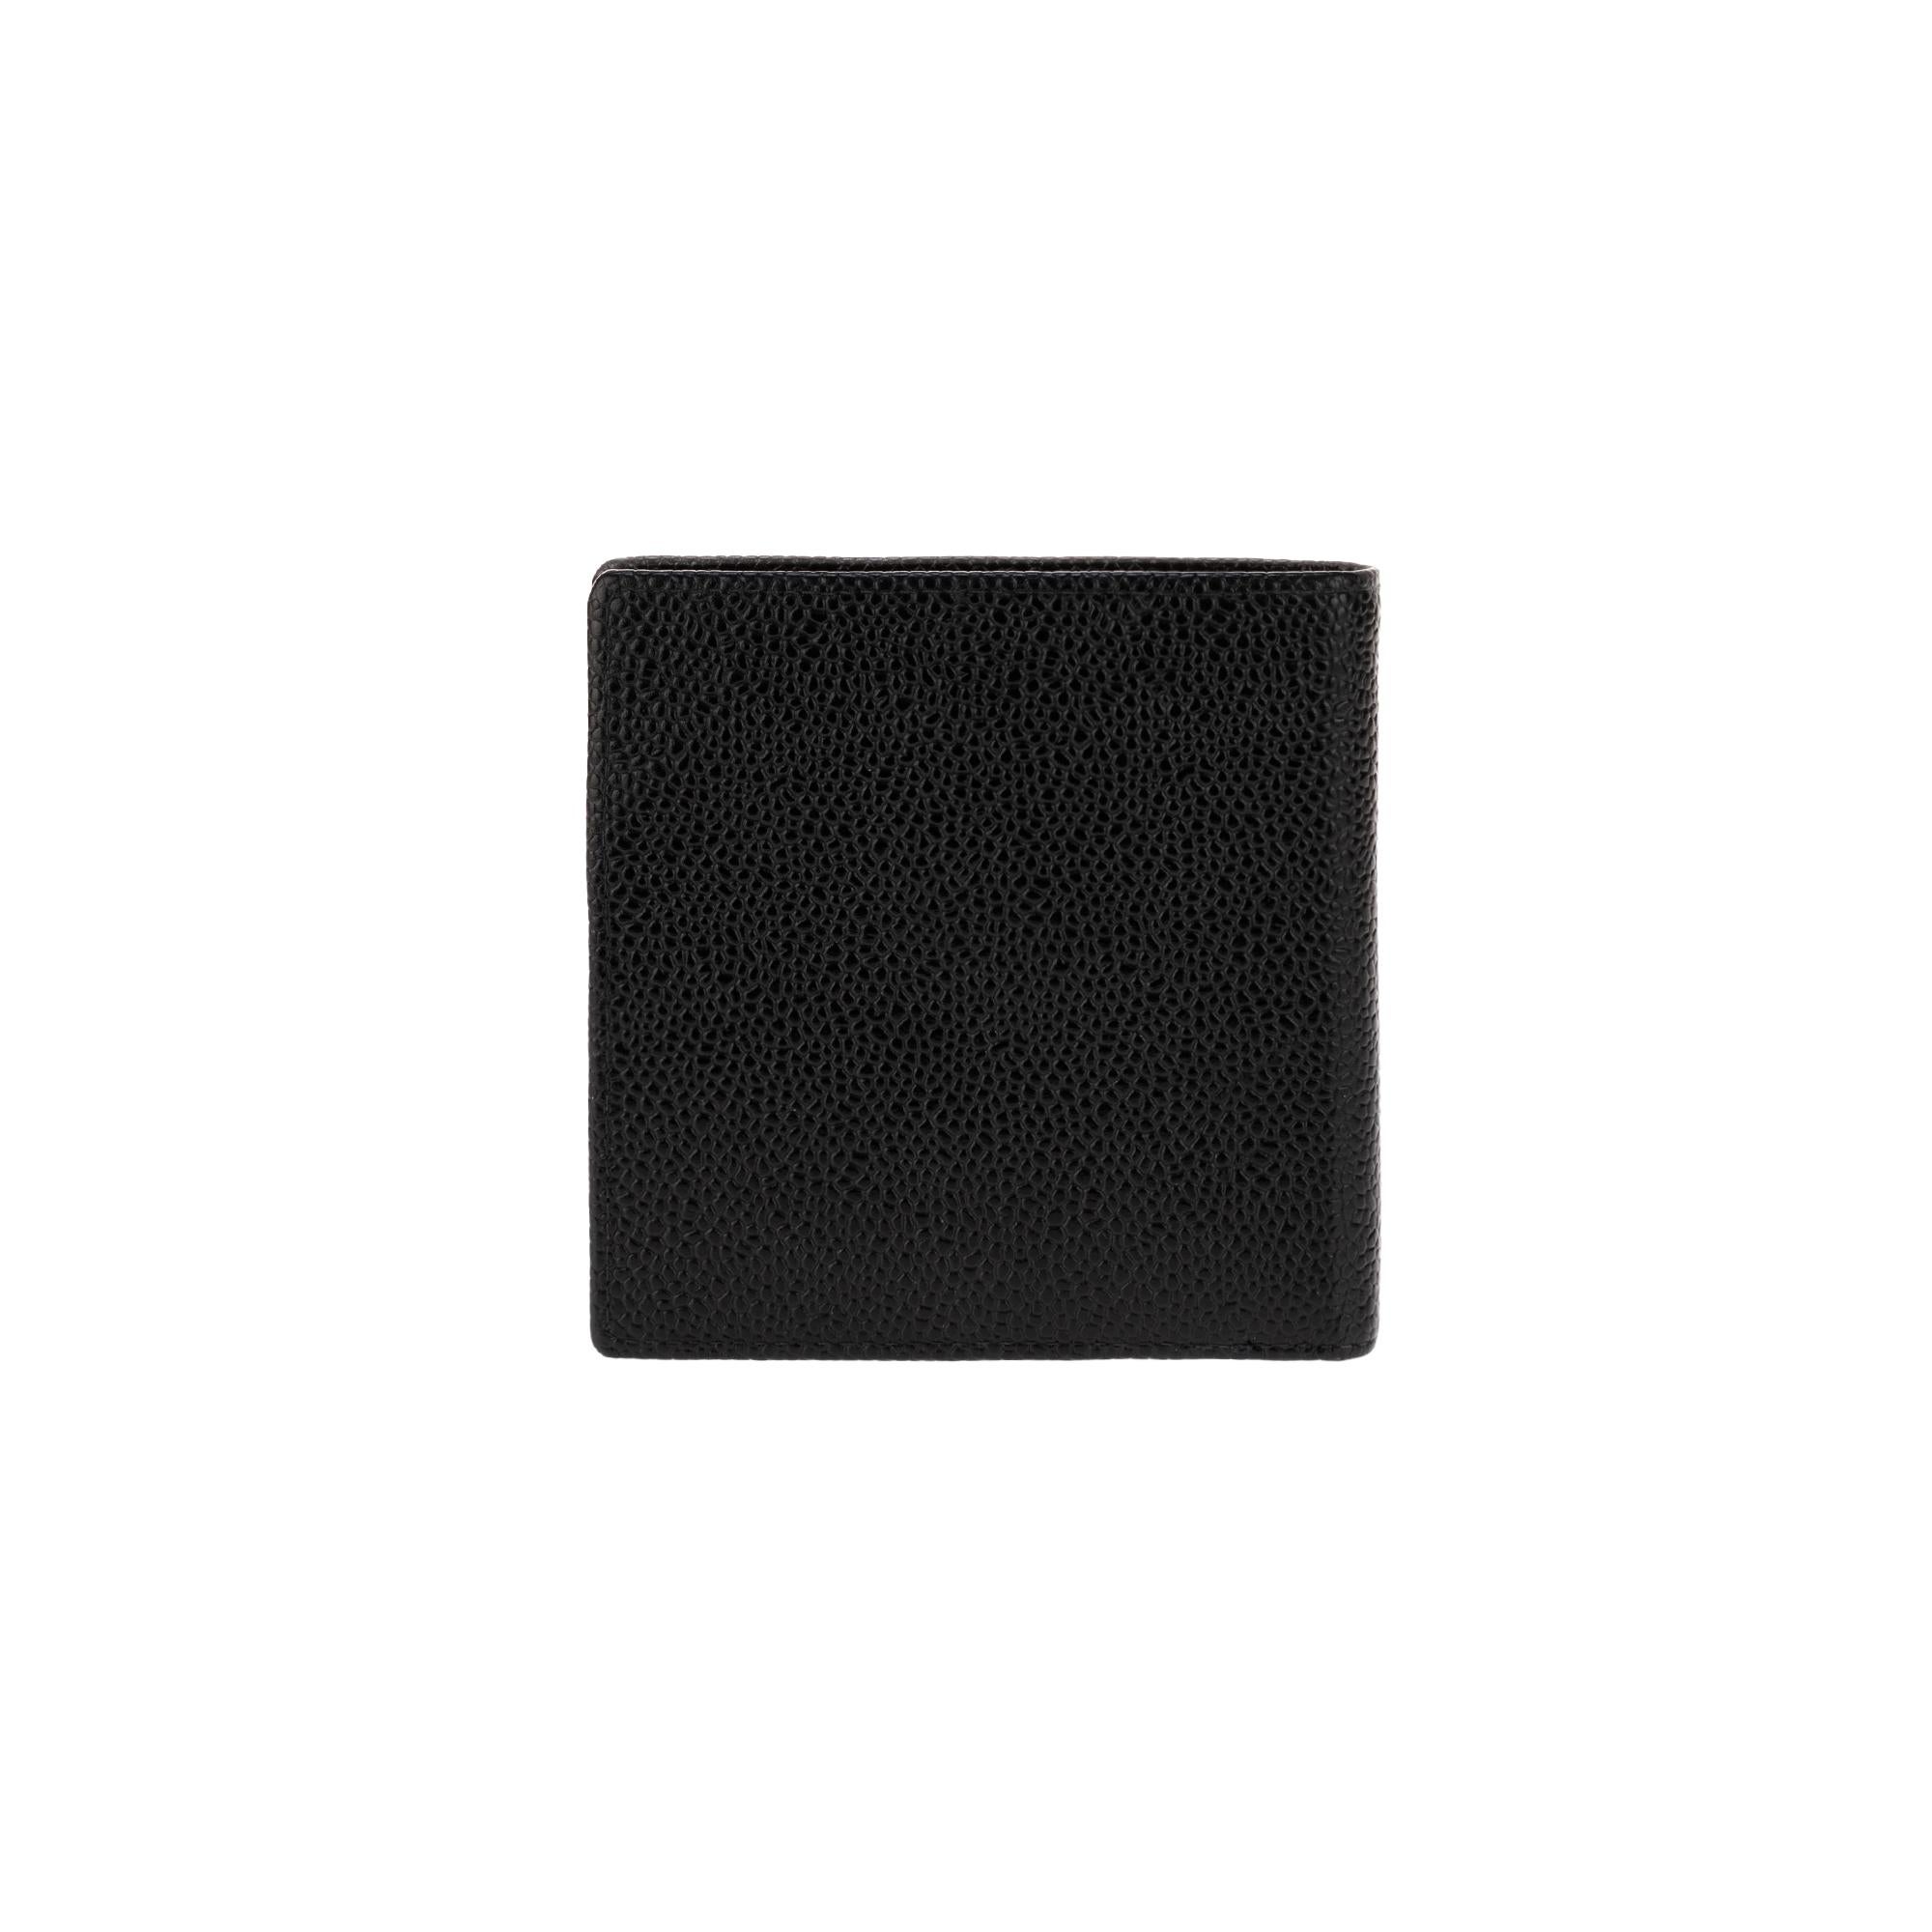 Wallet/ Cardholders/ Chanel coin wallet in black granular caviar leather.
 Embossed CC logo. 
4 card compartments. 
1 wallet compartment with snap closure. 
2 banknote compartments. 
Signature: Signature: 